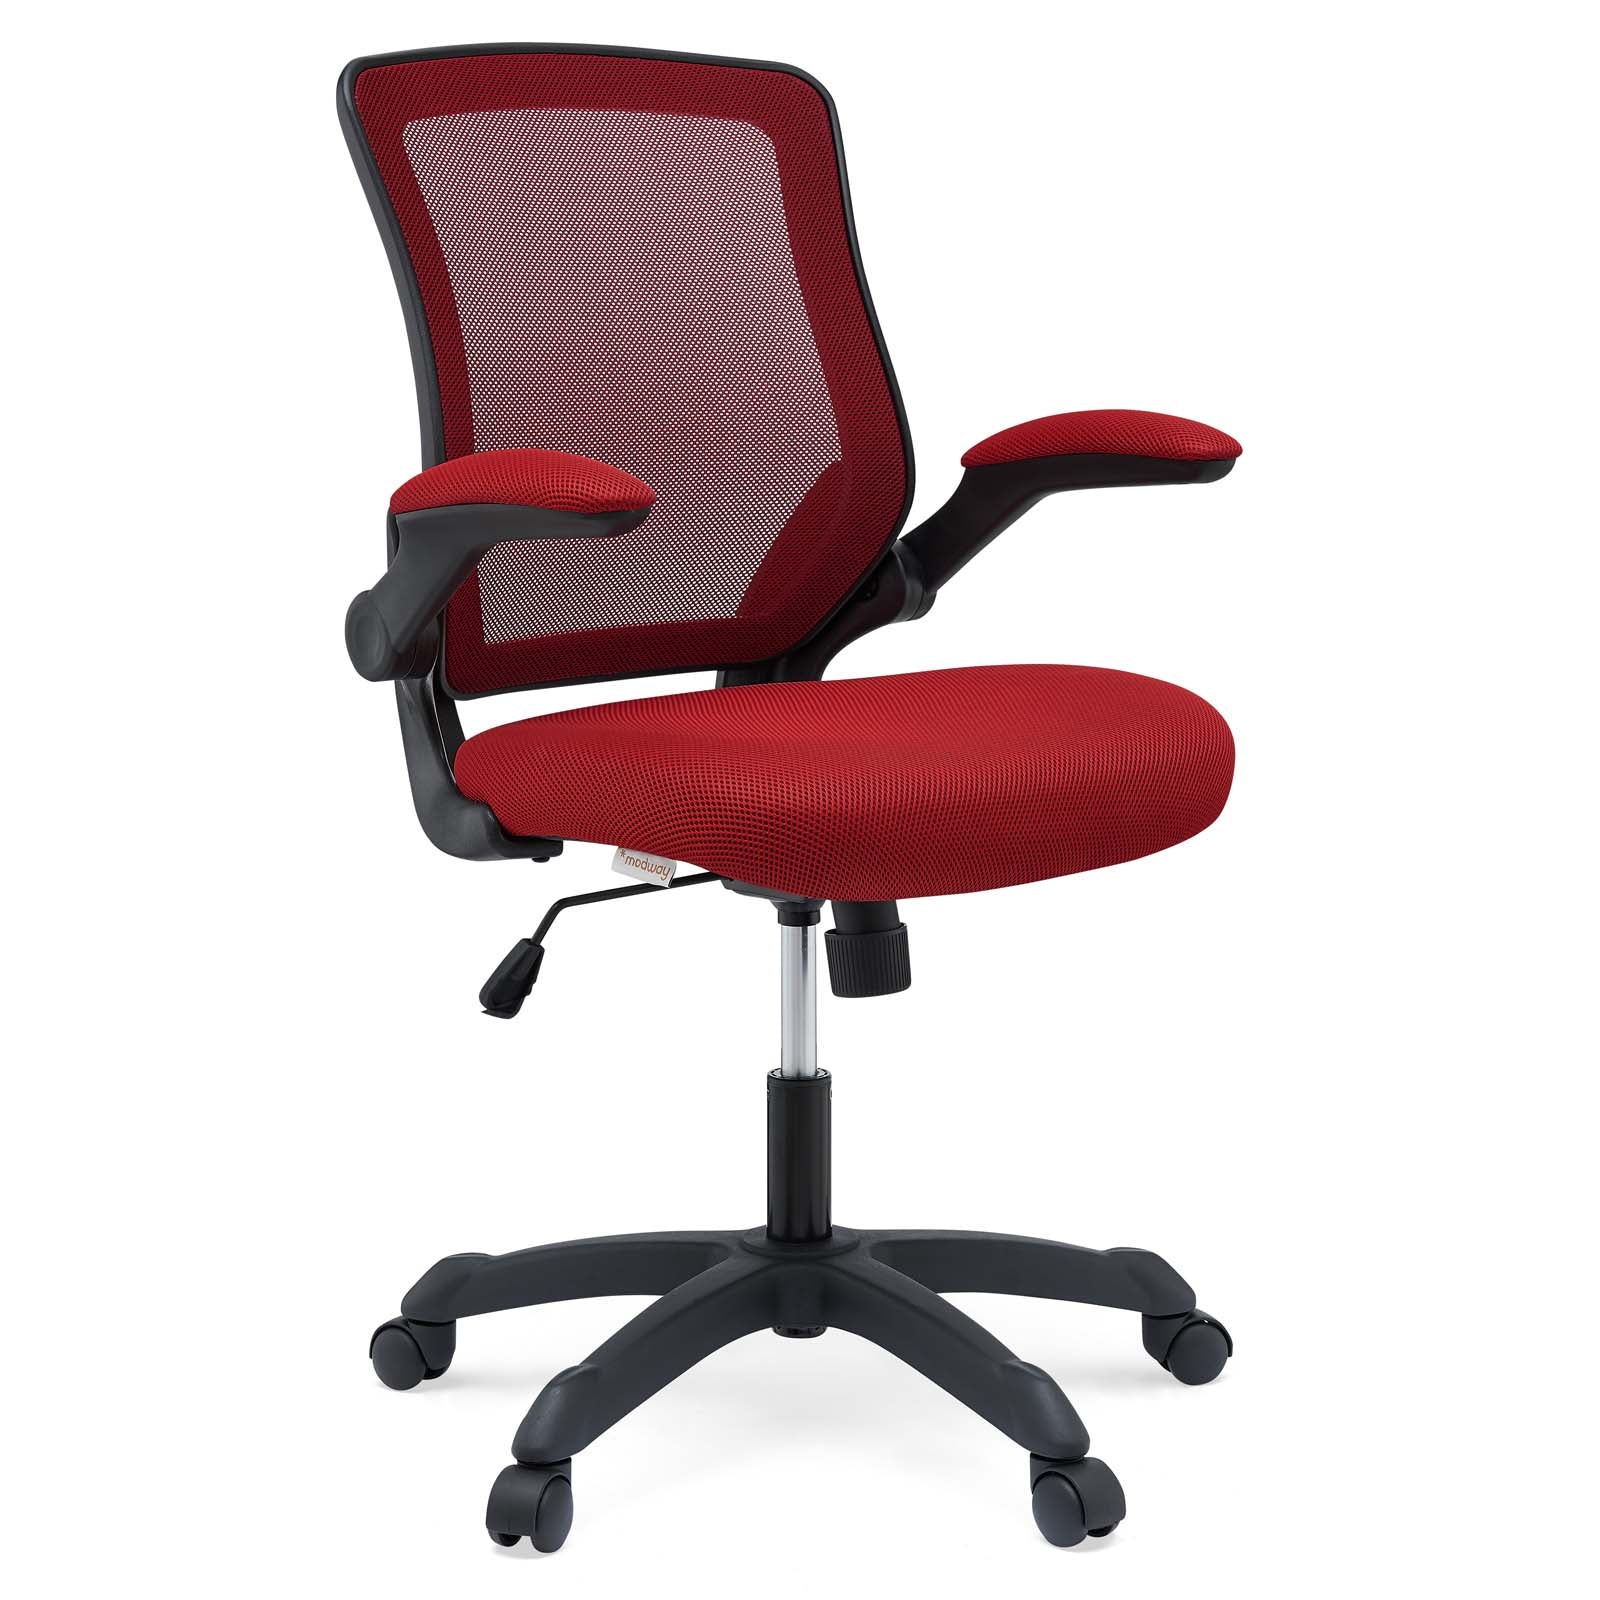 Shop Orange Veer Office Chair with Mesh Fabric Seat at BUILDMyplace